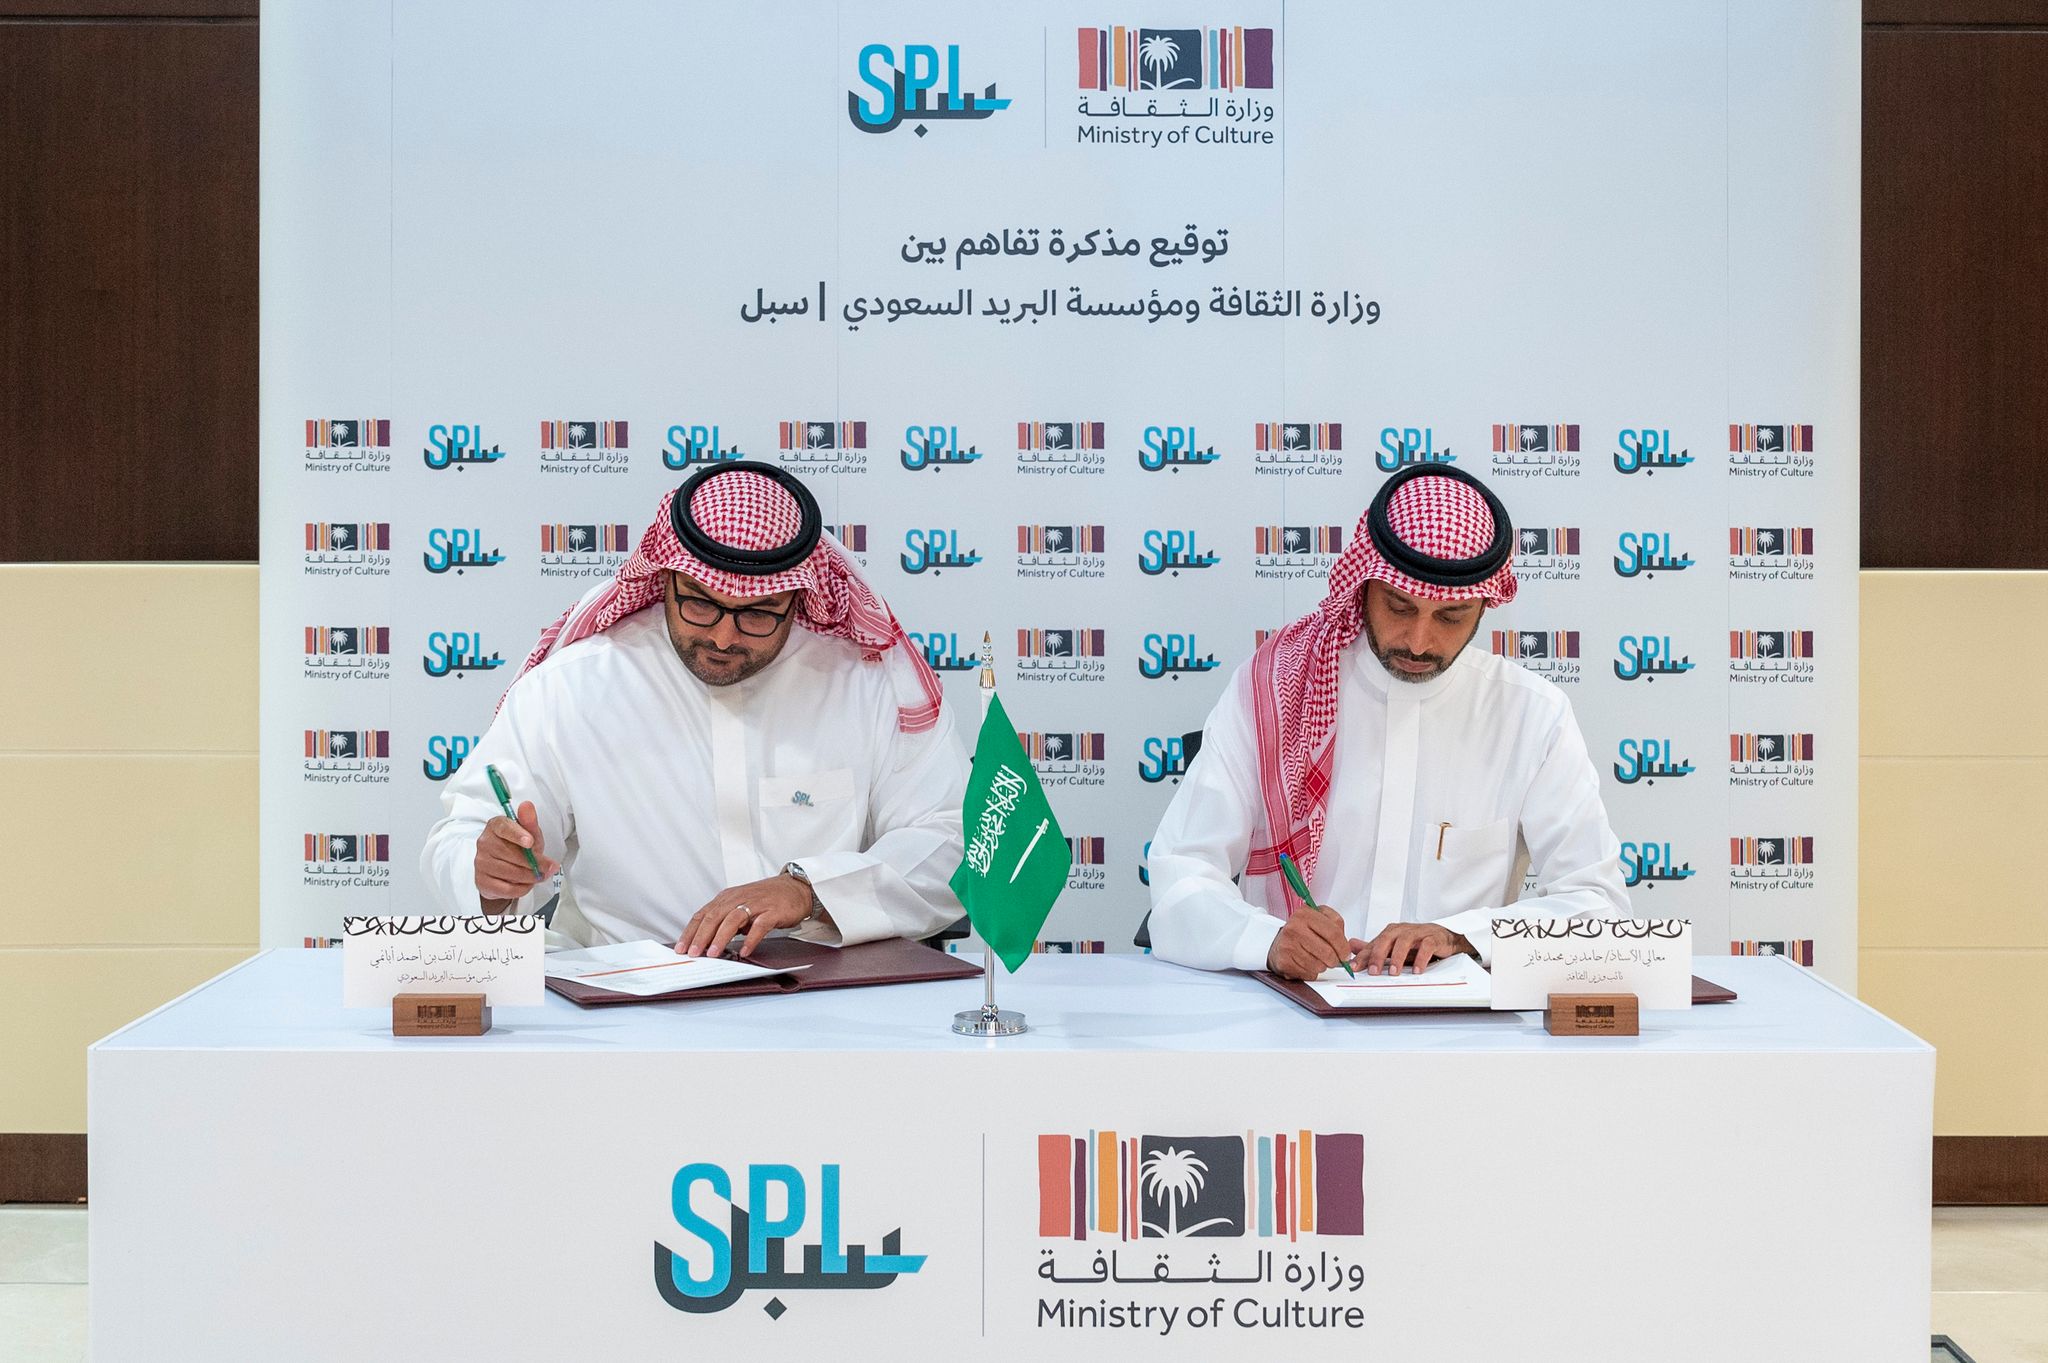 Ministry of Culture and SPL Agreement